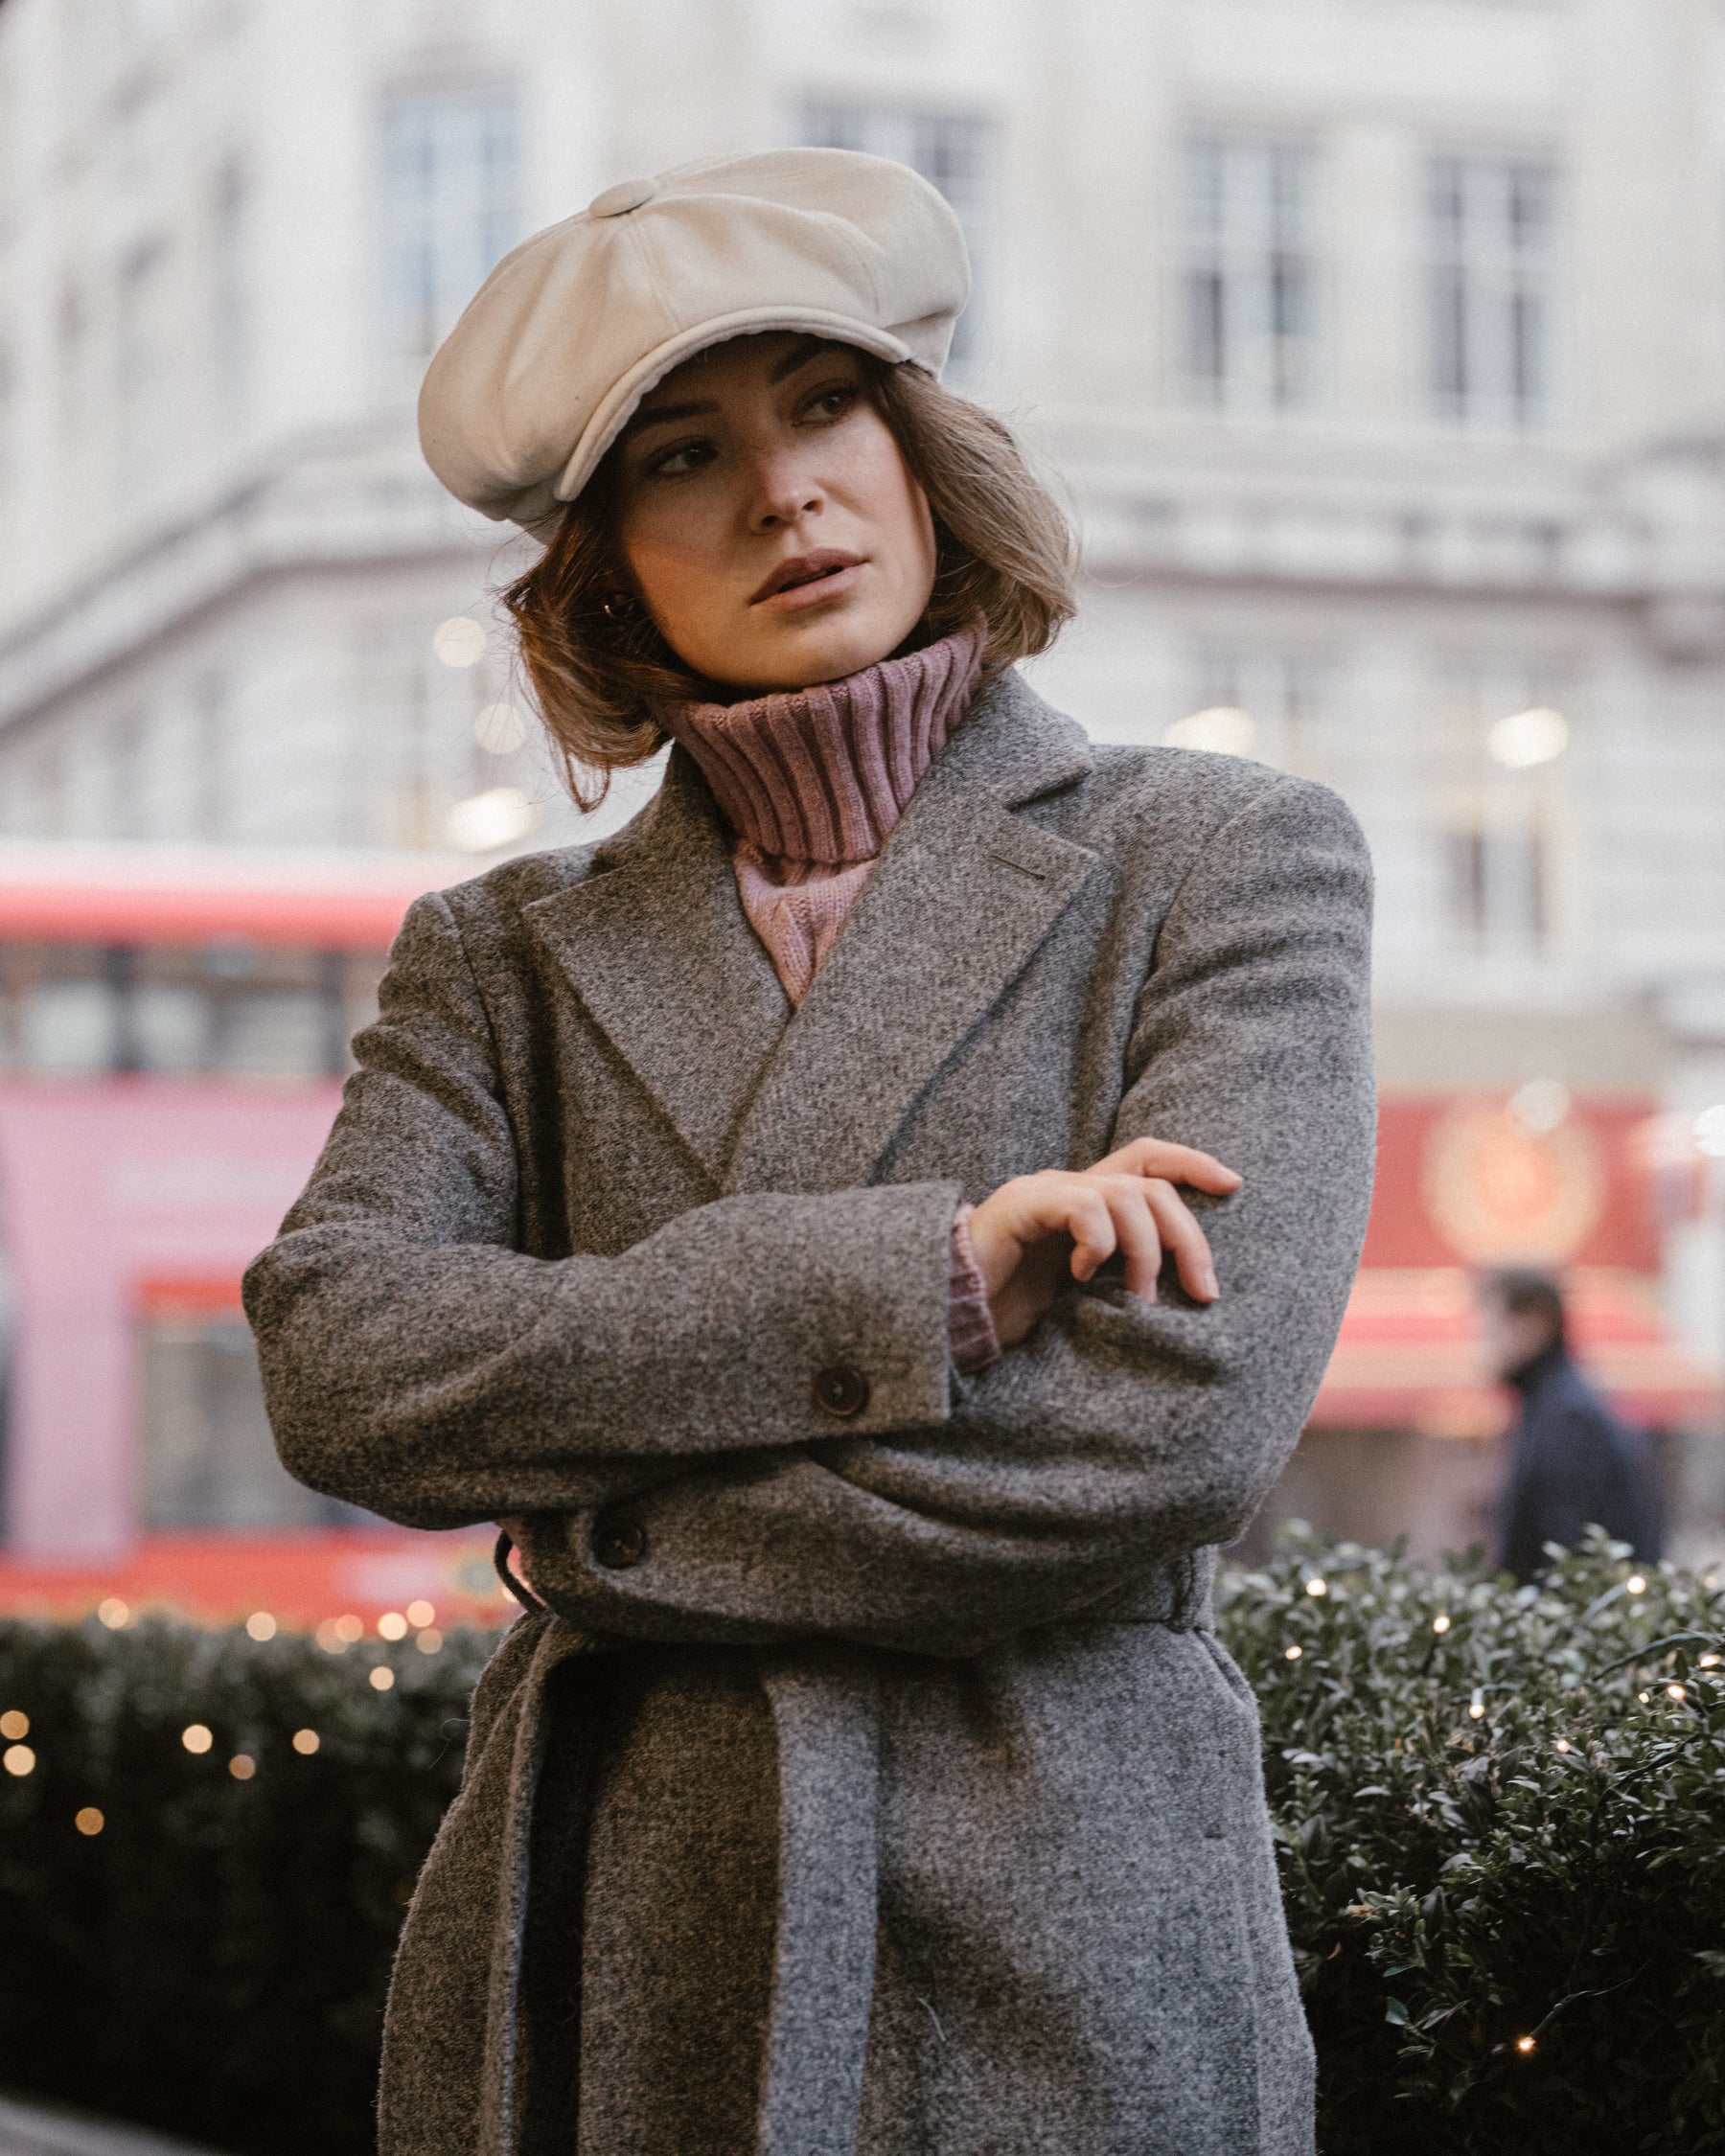 Laird Hatters | Made in England